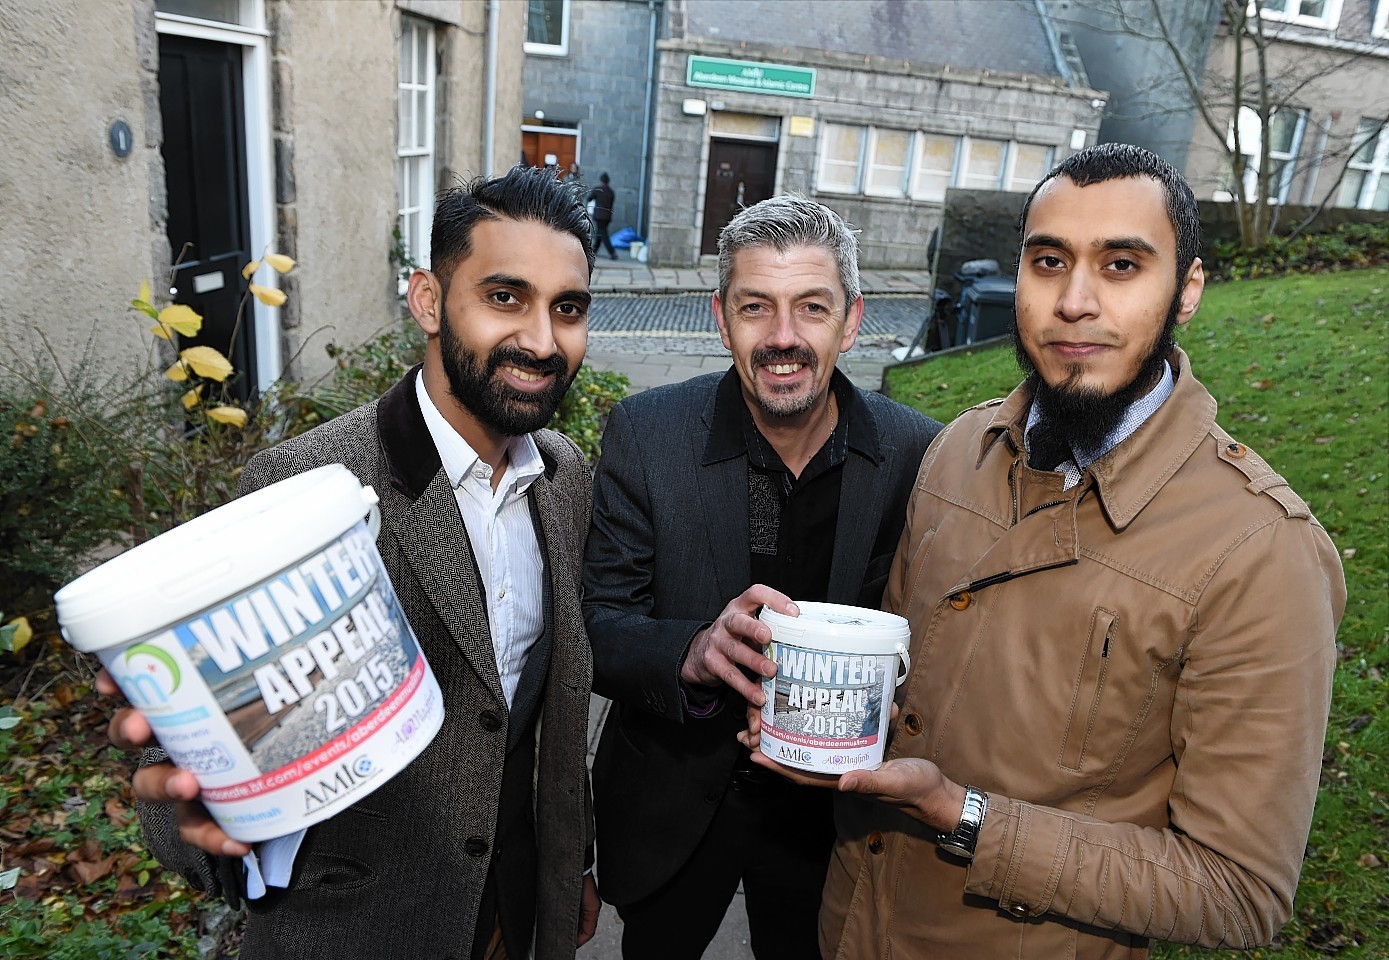 Sumon Hoque (left) and Mamun Razzak with Scott Baxter, Deputy Chief Executive for Aberdeen Cyrenians, launching the Aberdeen Muslims Winter Appeal